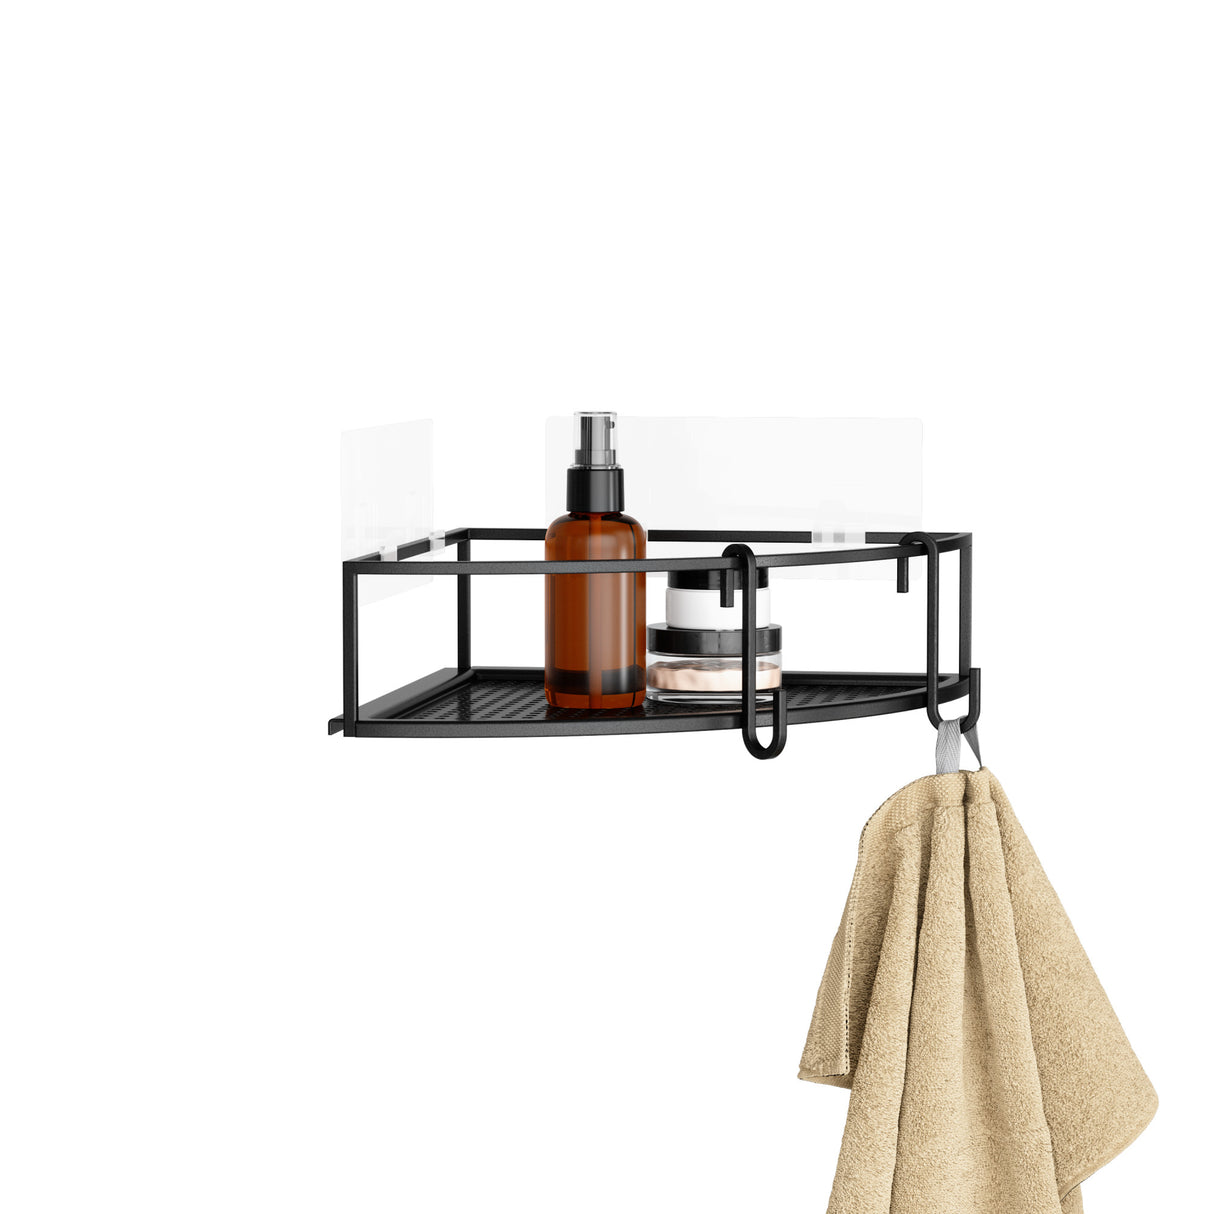 Cubiko Iron Shower Caddy – MoMA Design Store